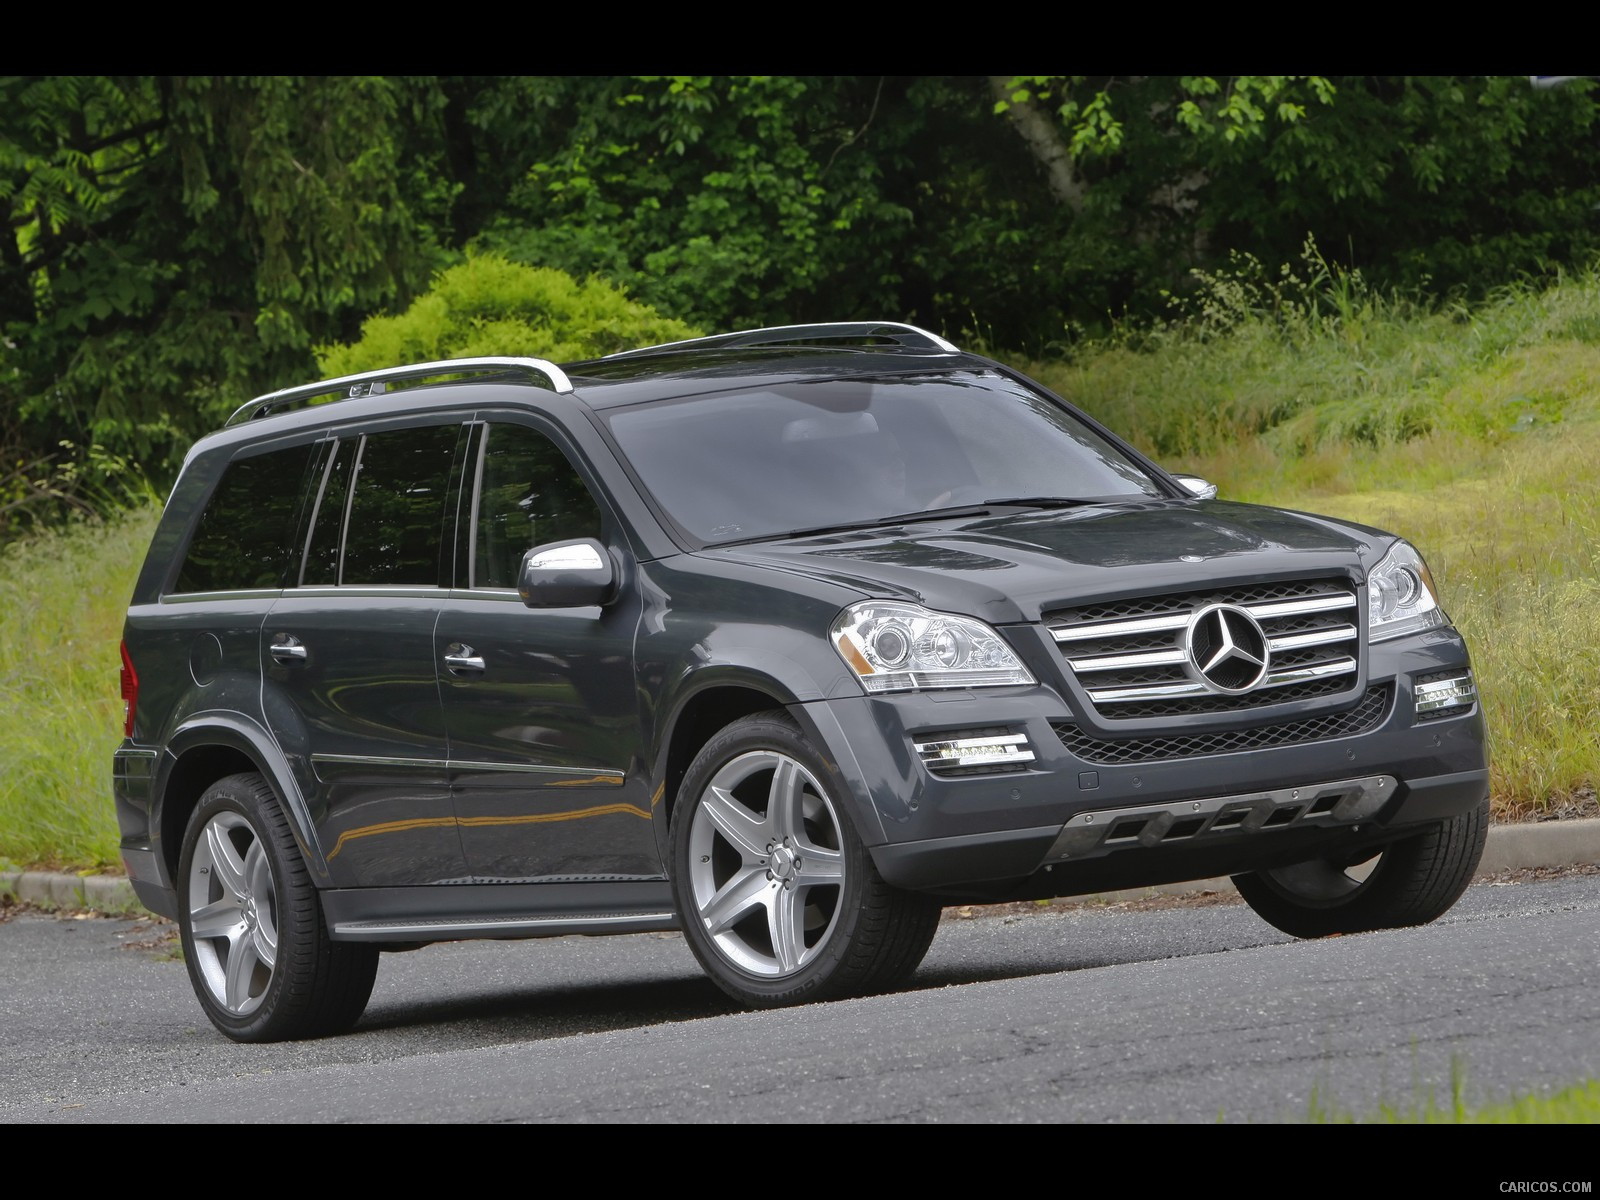 2010 Mercedes-Benz GL550 - Front, #47 of 112